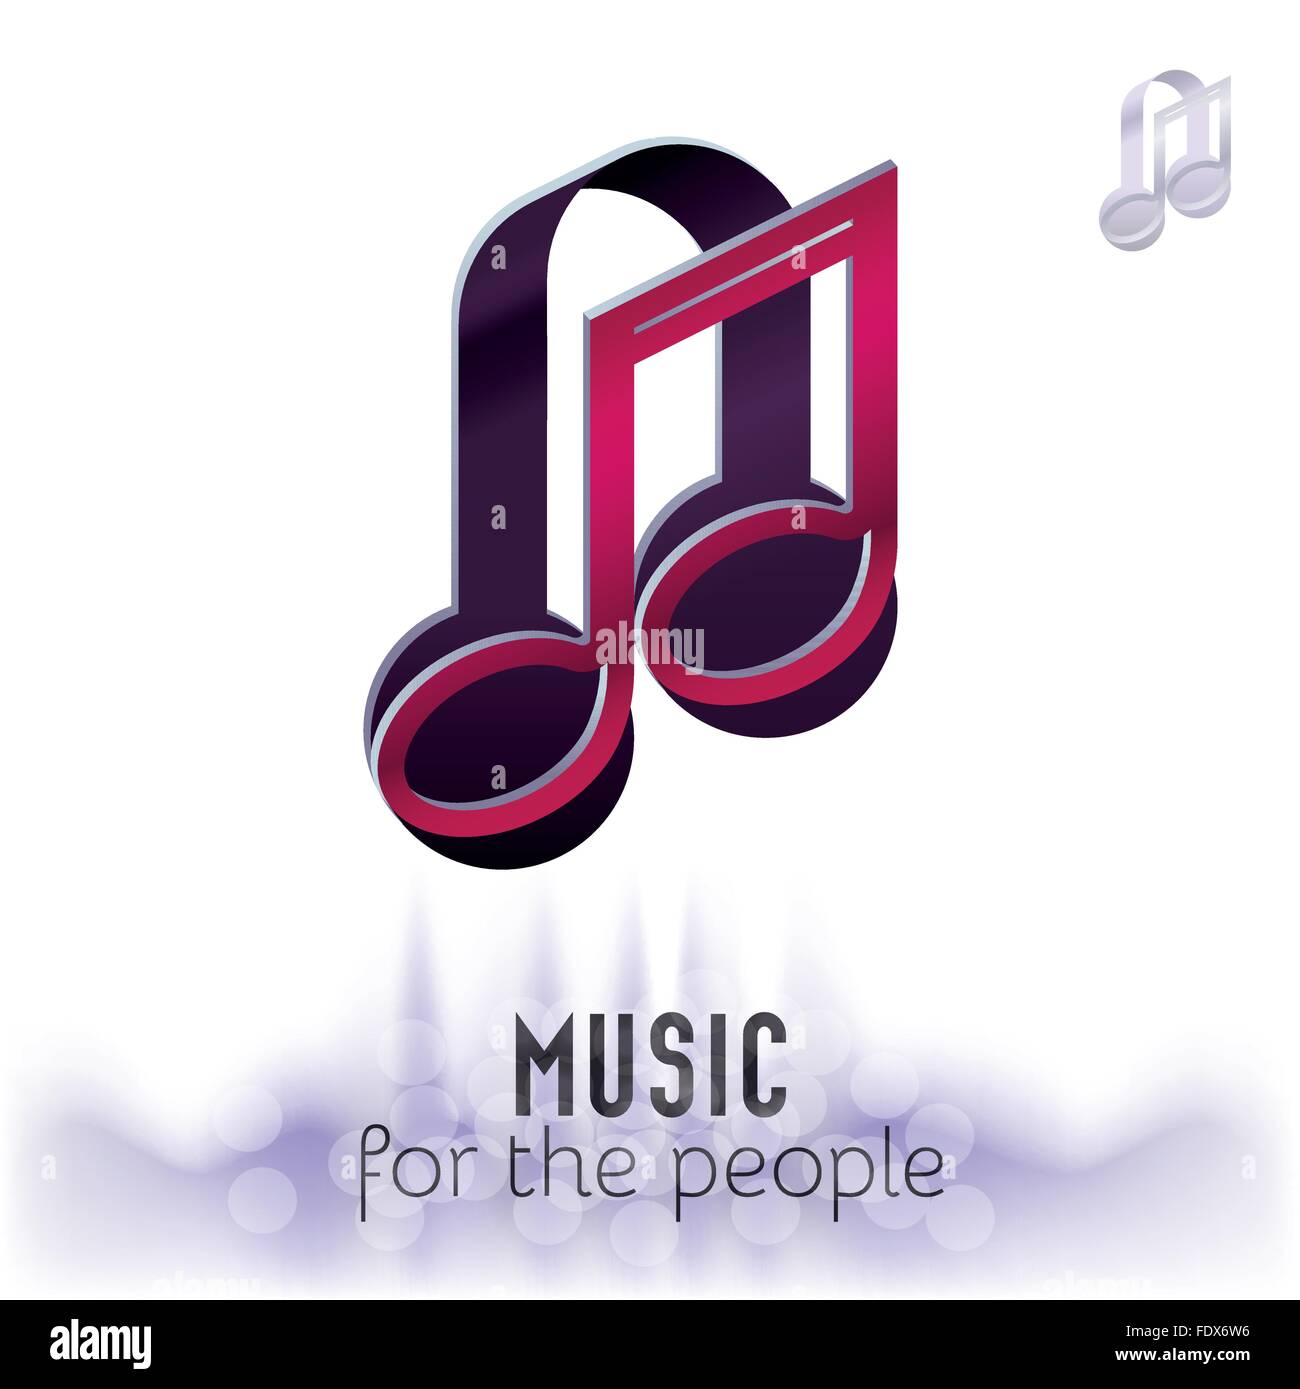 Music concept with musical note and headphones, sample text, creative background that reminds of sound waves. Stock Vector